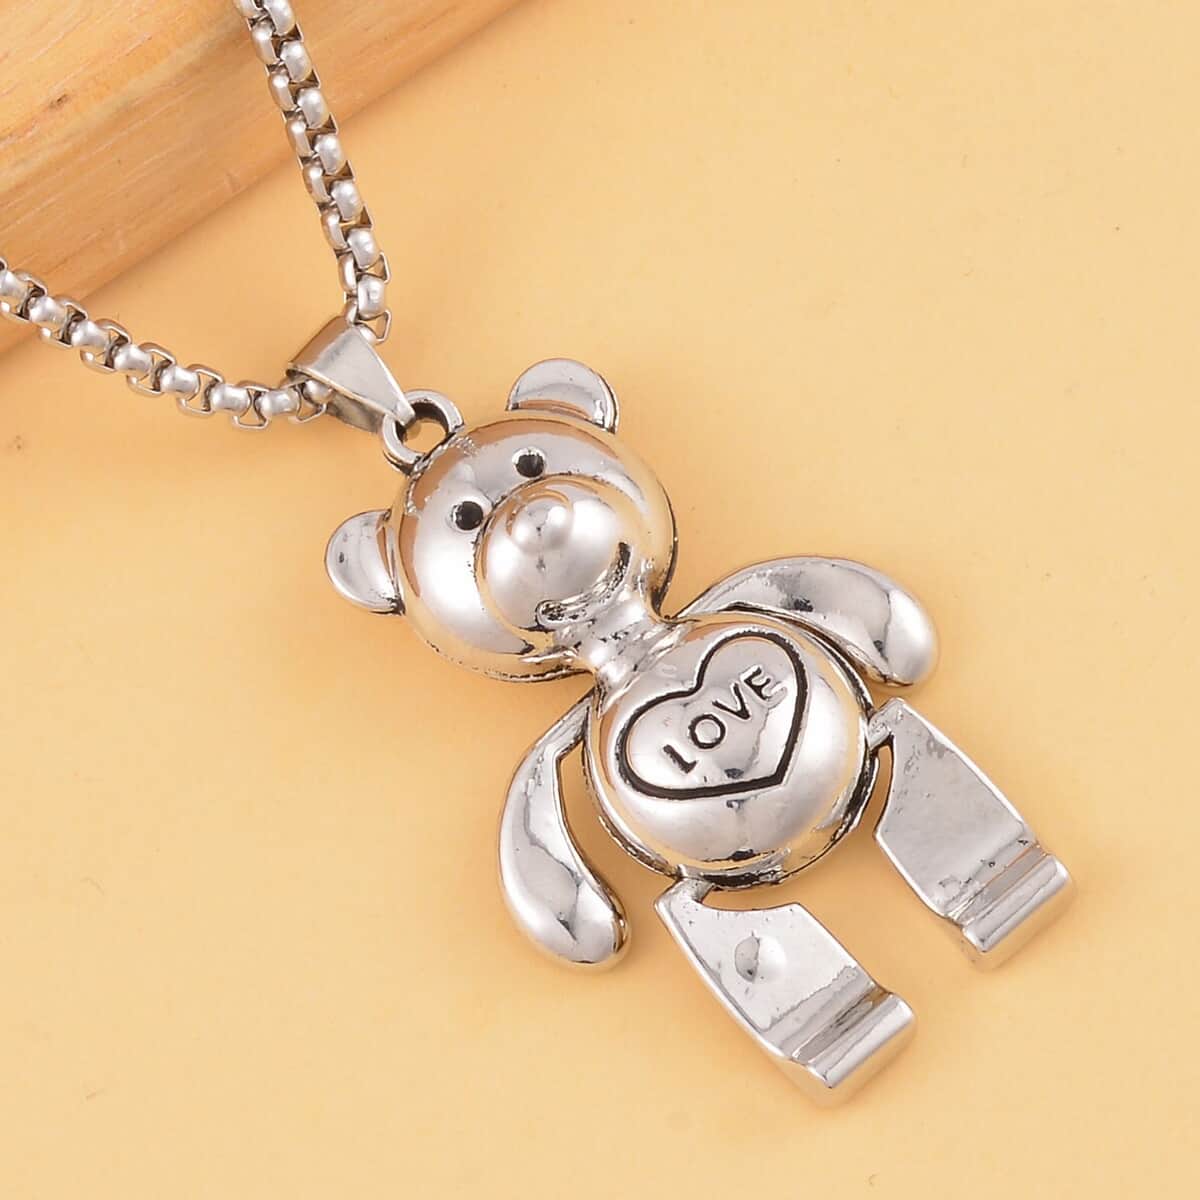 Buy Bear Pendant in Silvertone with Stainless Steel Necklace 28 Inches ...